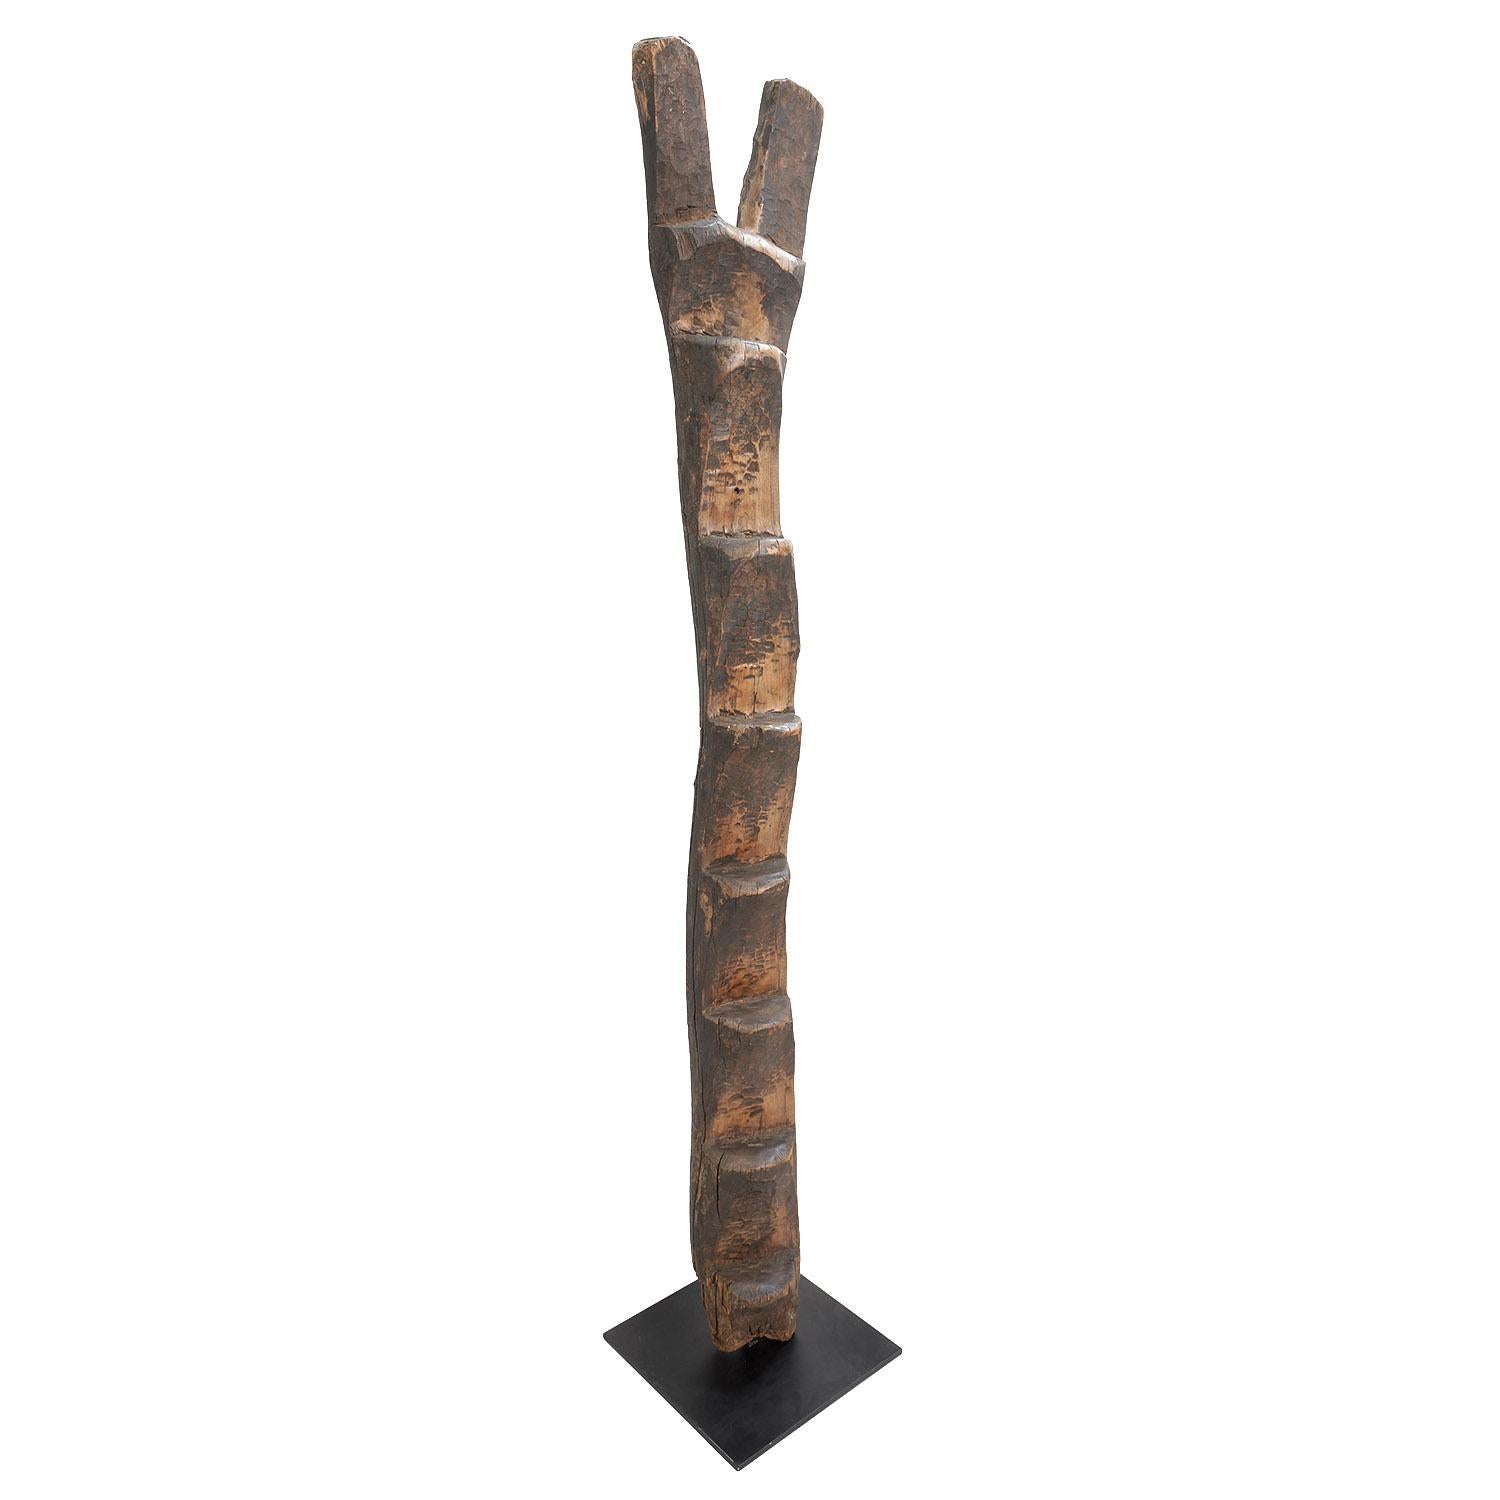 Large Dogon Ladder, Mali

Wood

Early to mid-20th century

Measures: 100 x 17 x 8 in. / 254 x 43 x 20 cm

Mounted on a custom display stand that measures 18 x 18 in. / 46 x 46 cm

With a smooth yet eroded patina, this ladder was likely